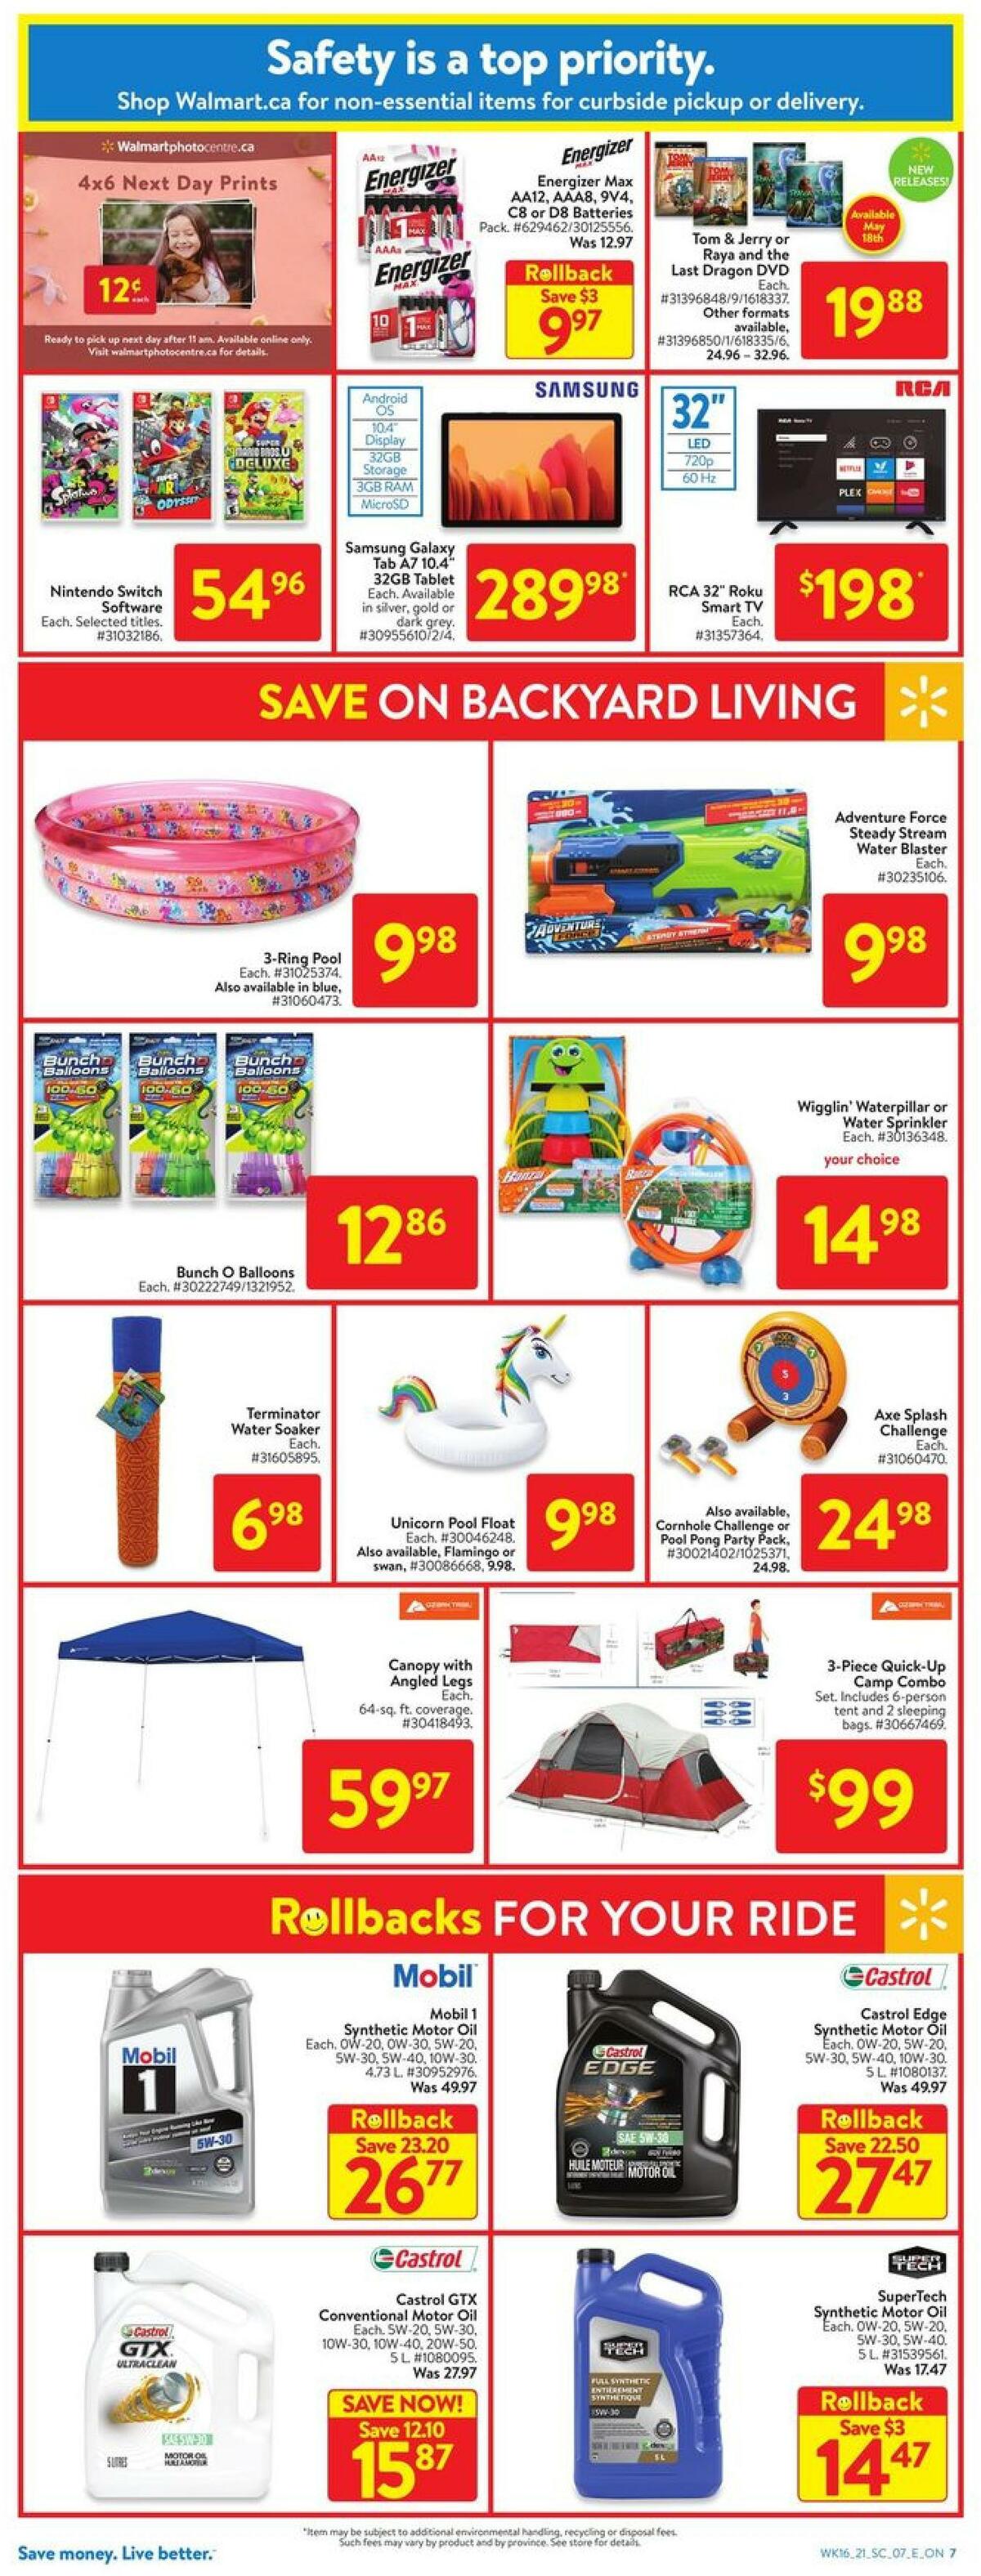 Walmart Flyer from May 13